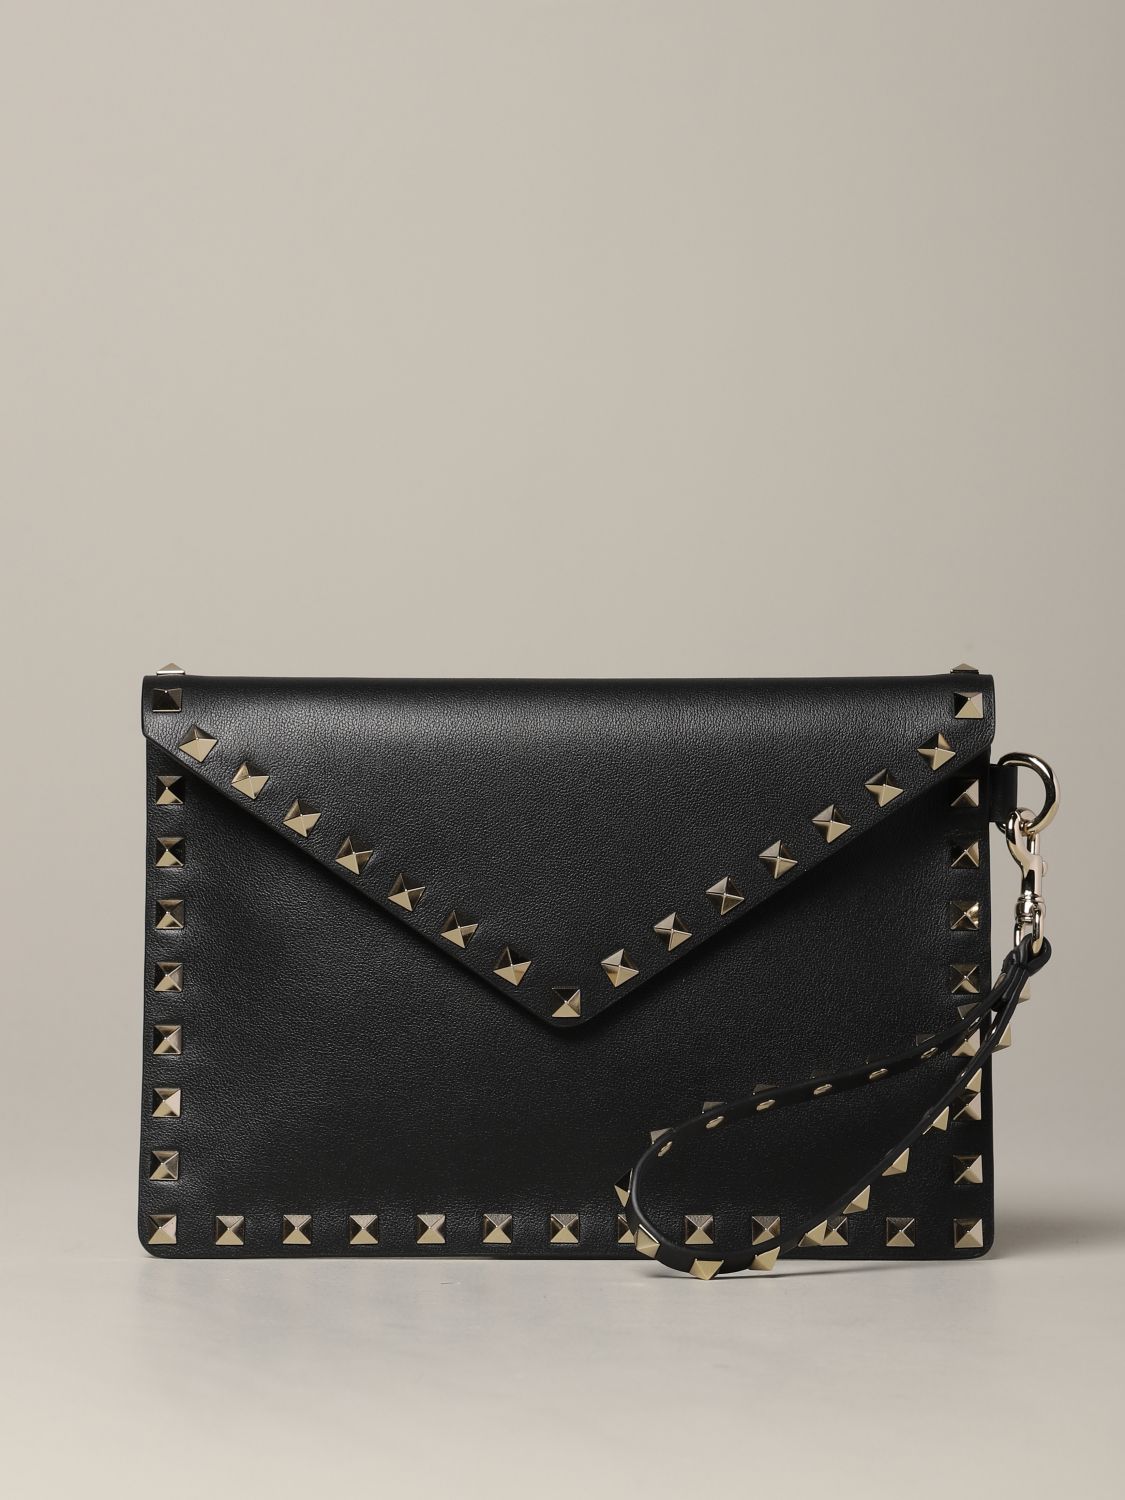 Valentino Garavani Outlet: leather clutch bag with studs - Black ...